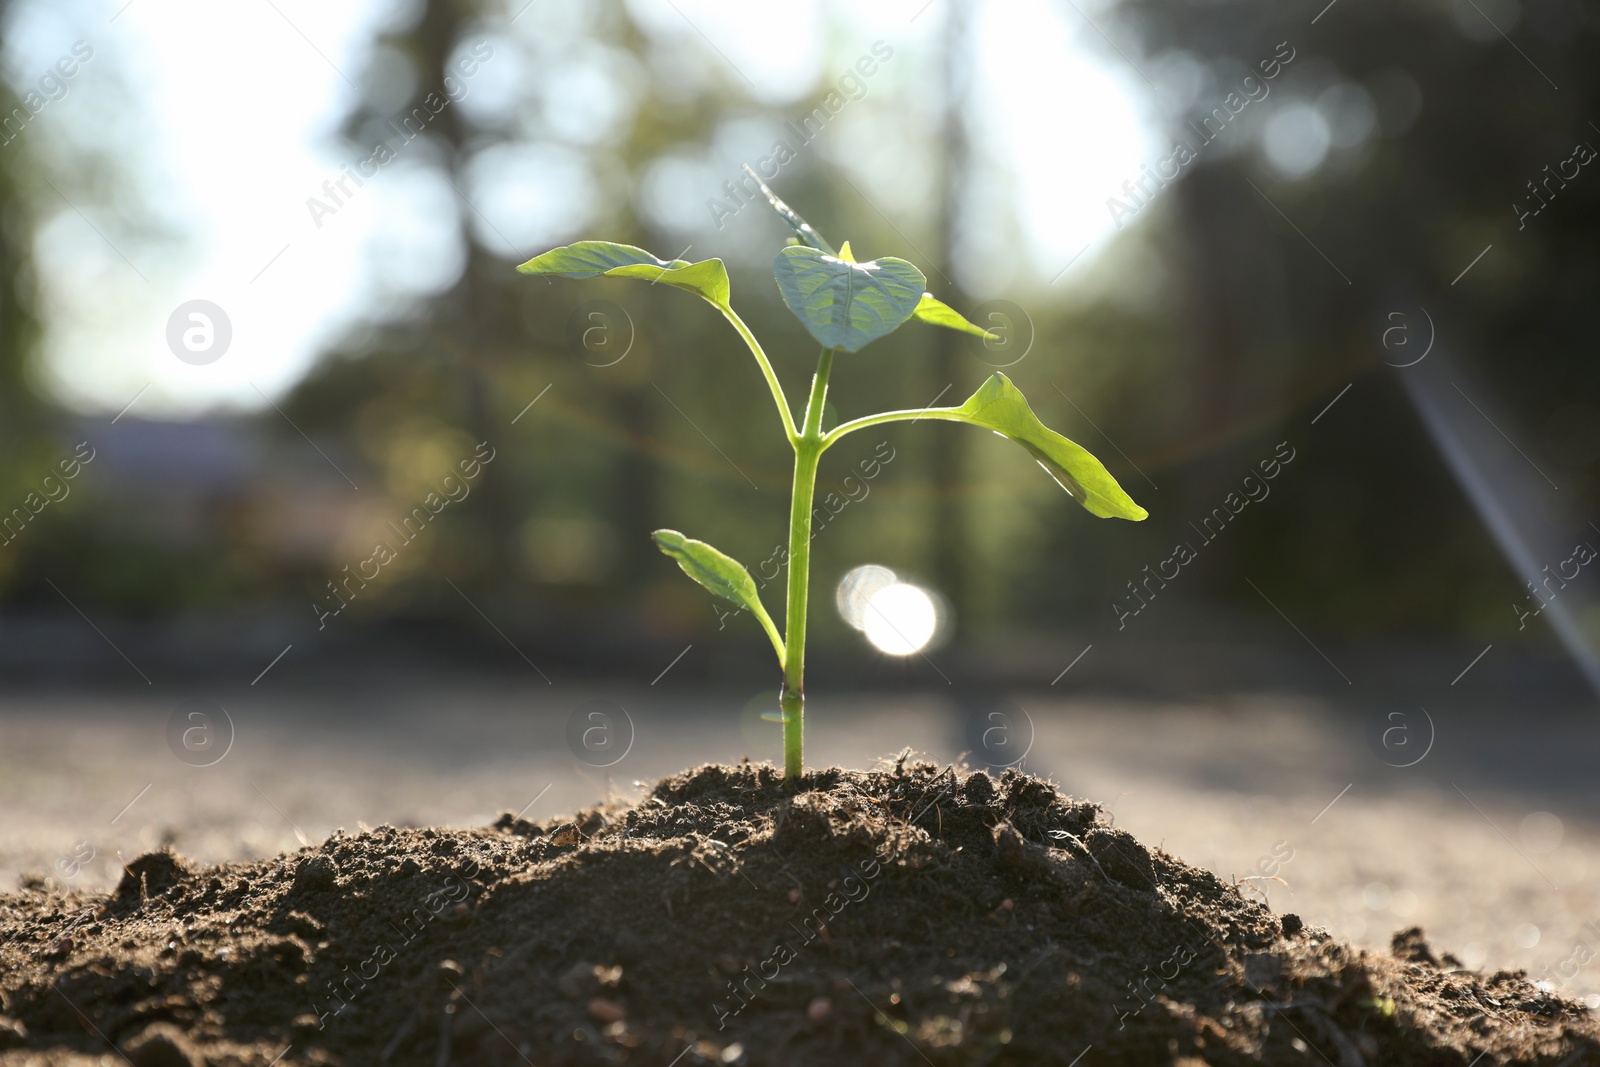 Photo of Young seedling growing in soil outdoors on sunny day